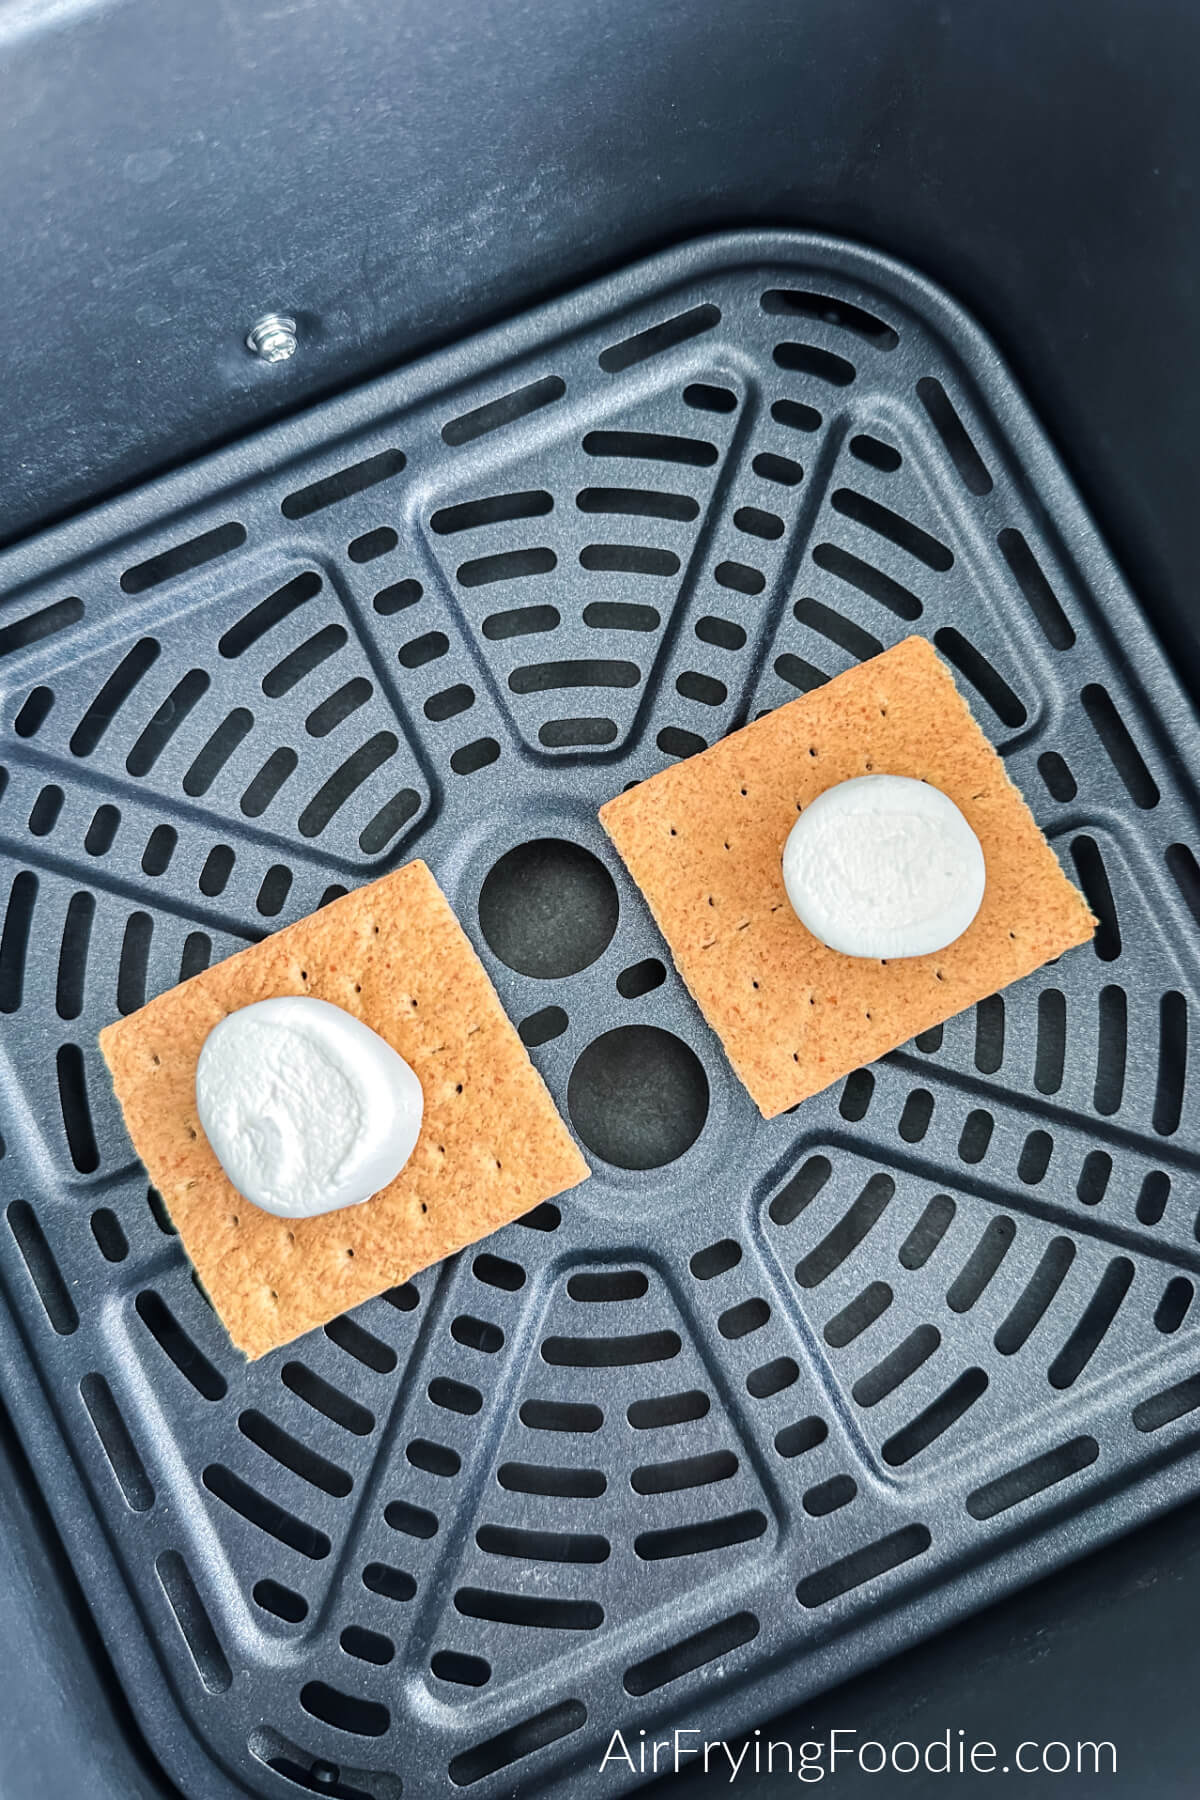 Marshmallow halved on top of graham crackers in the basket of the air fryer.